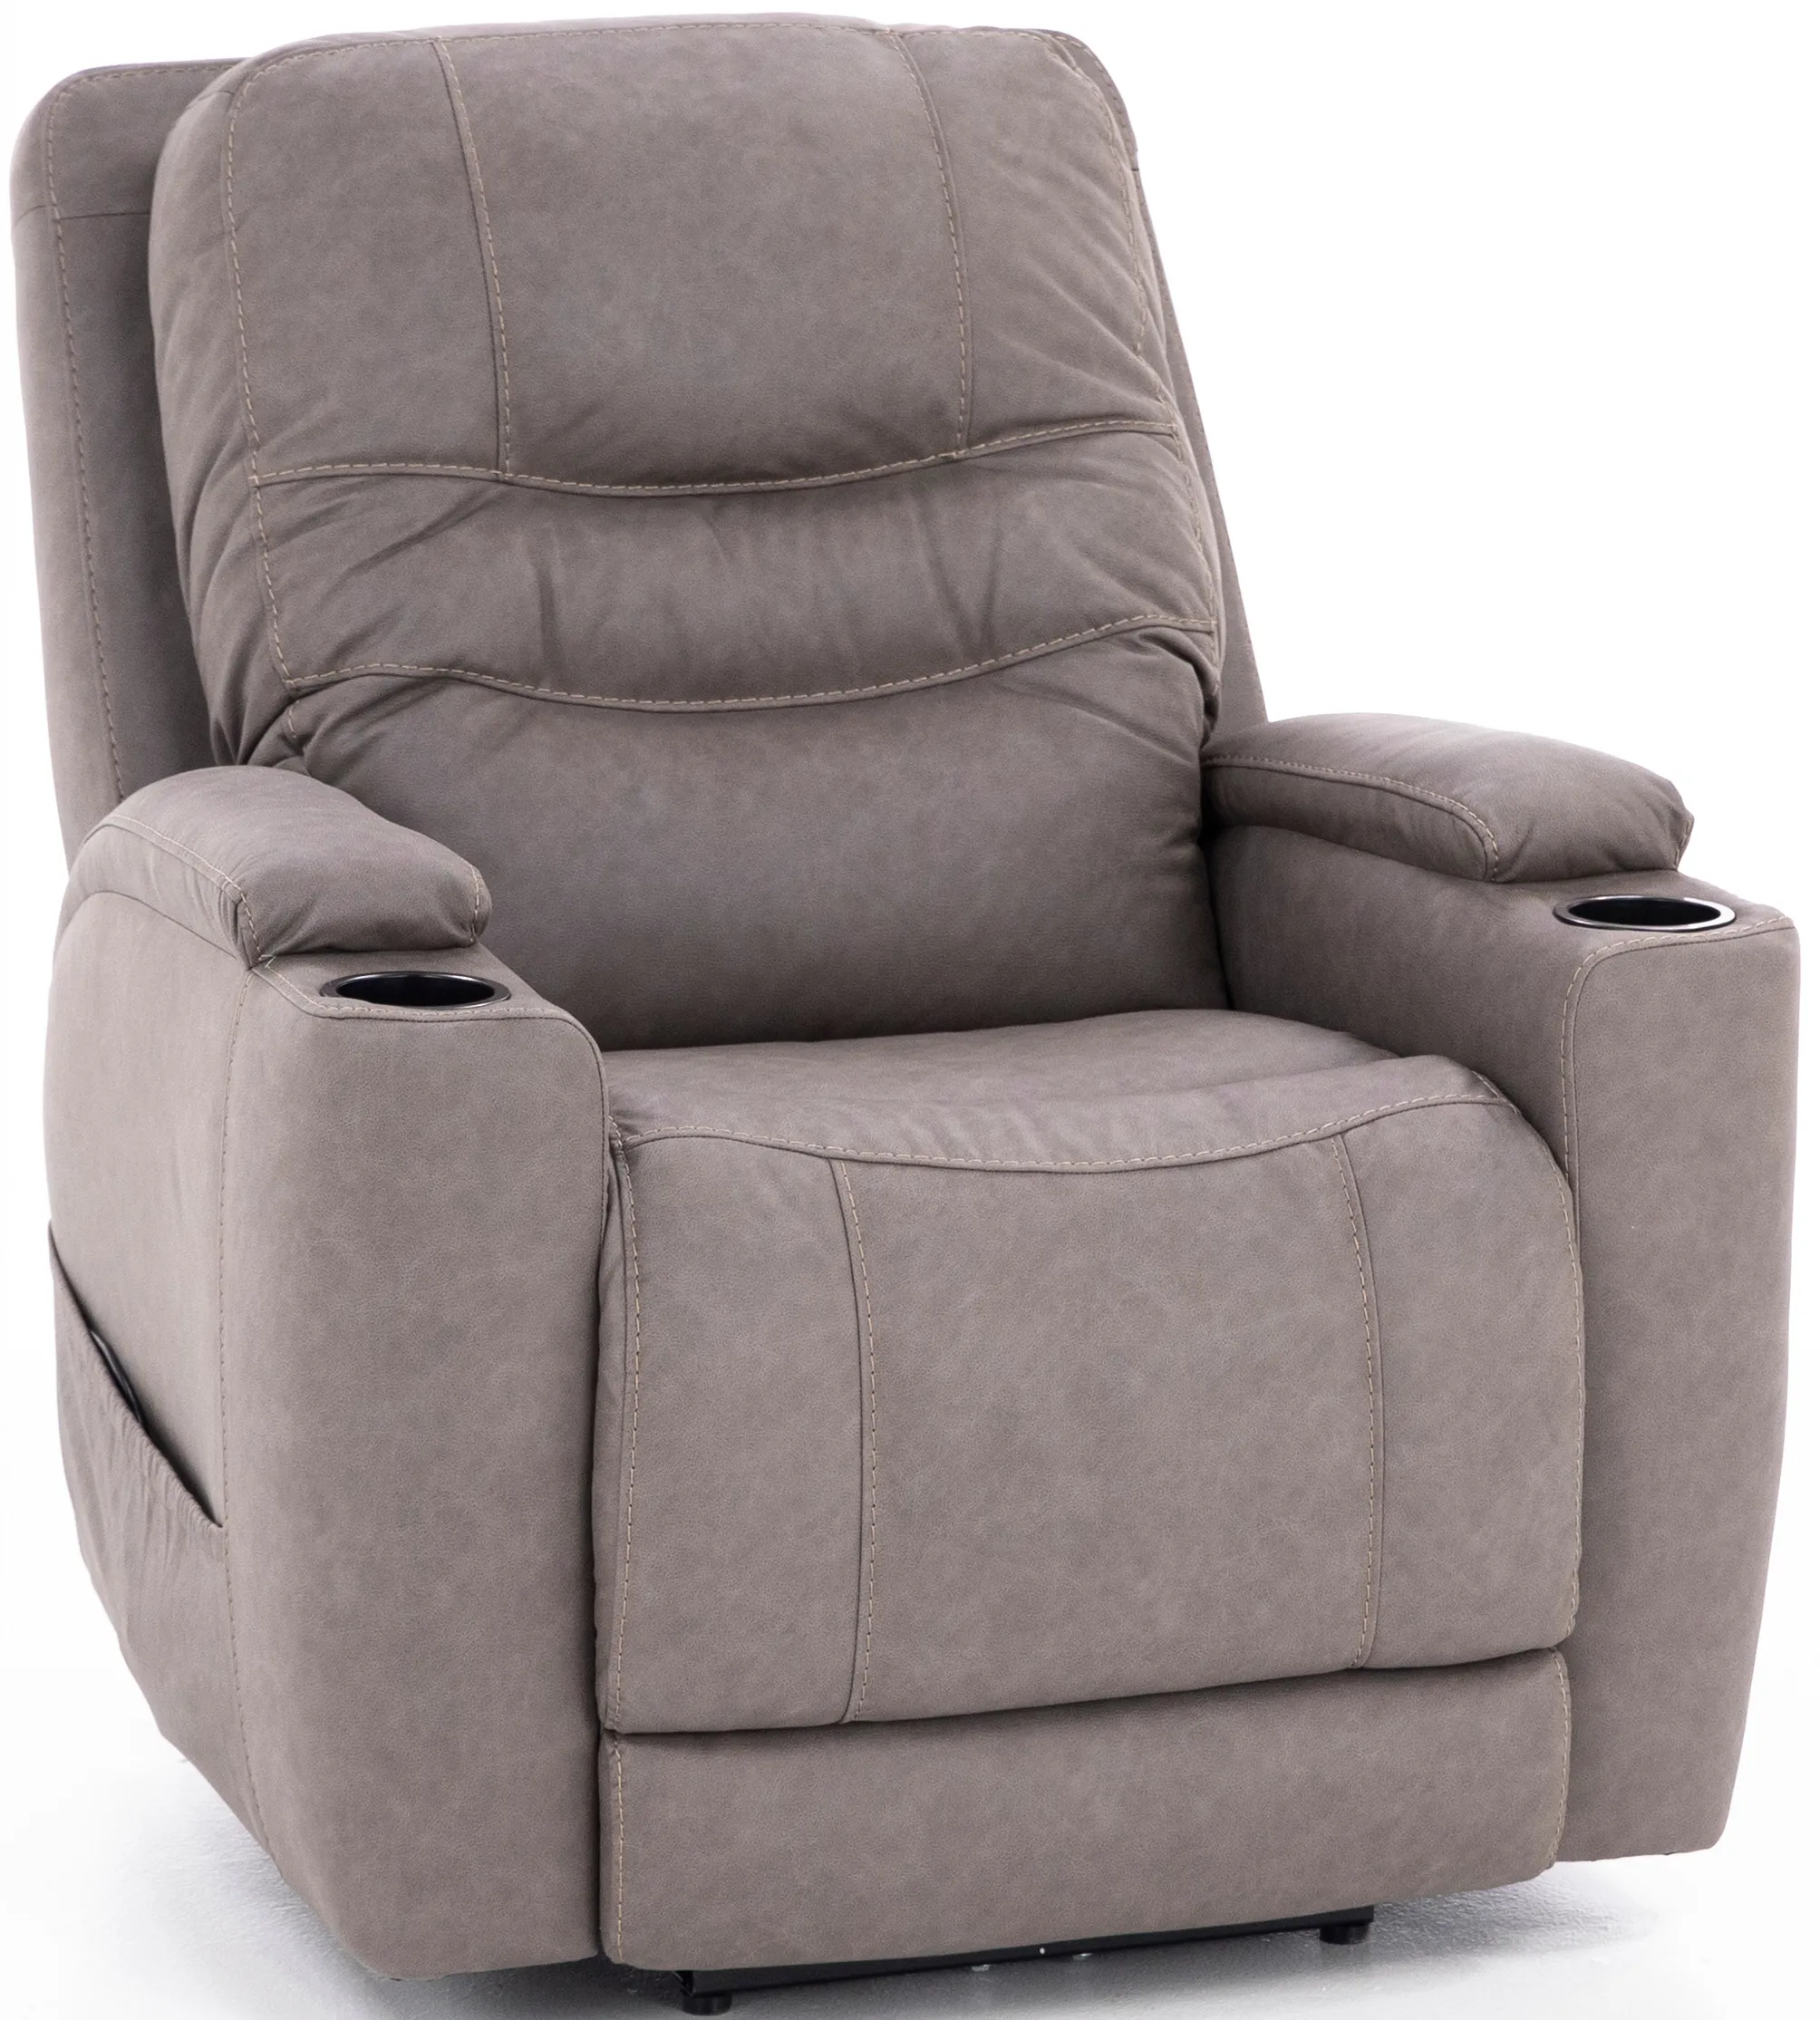 Chet Fully Loaded Wall Saver Recliner in Grey